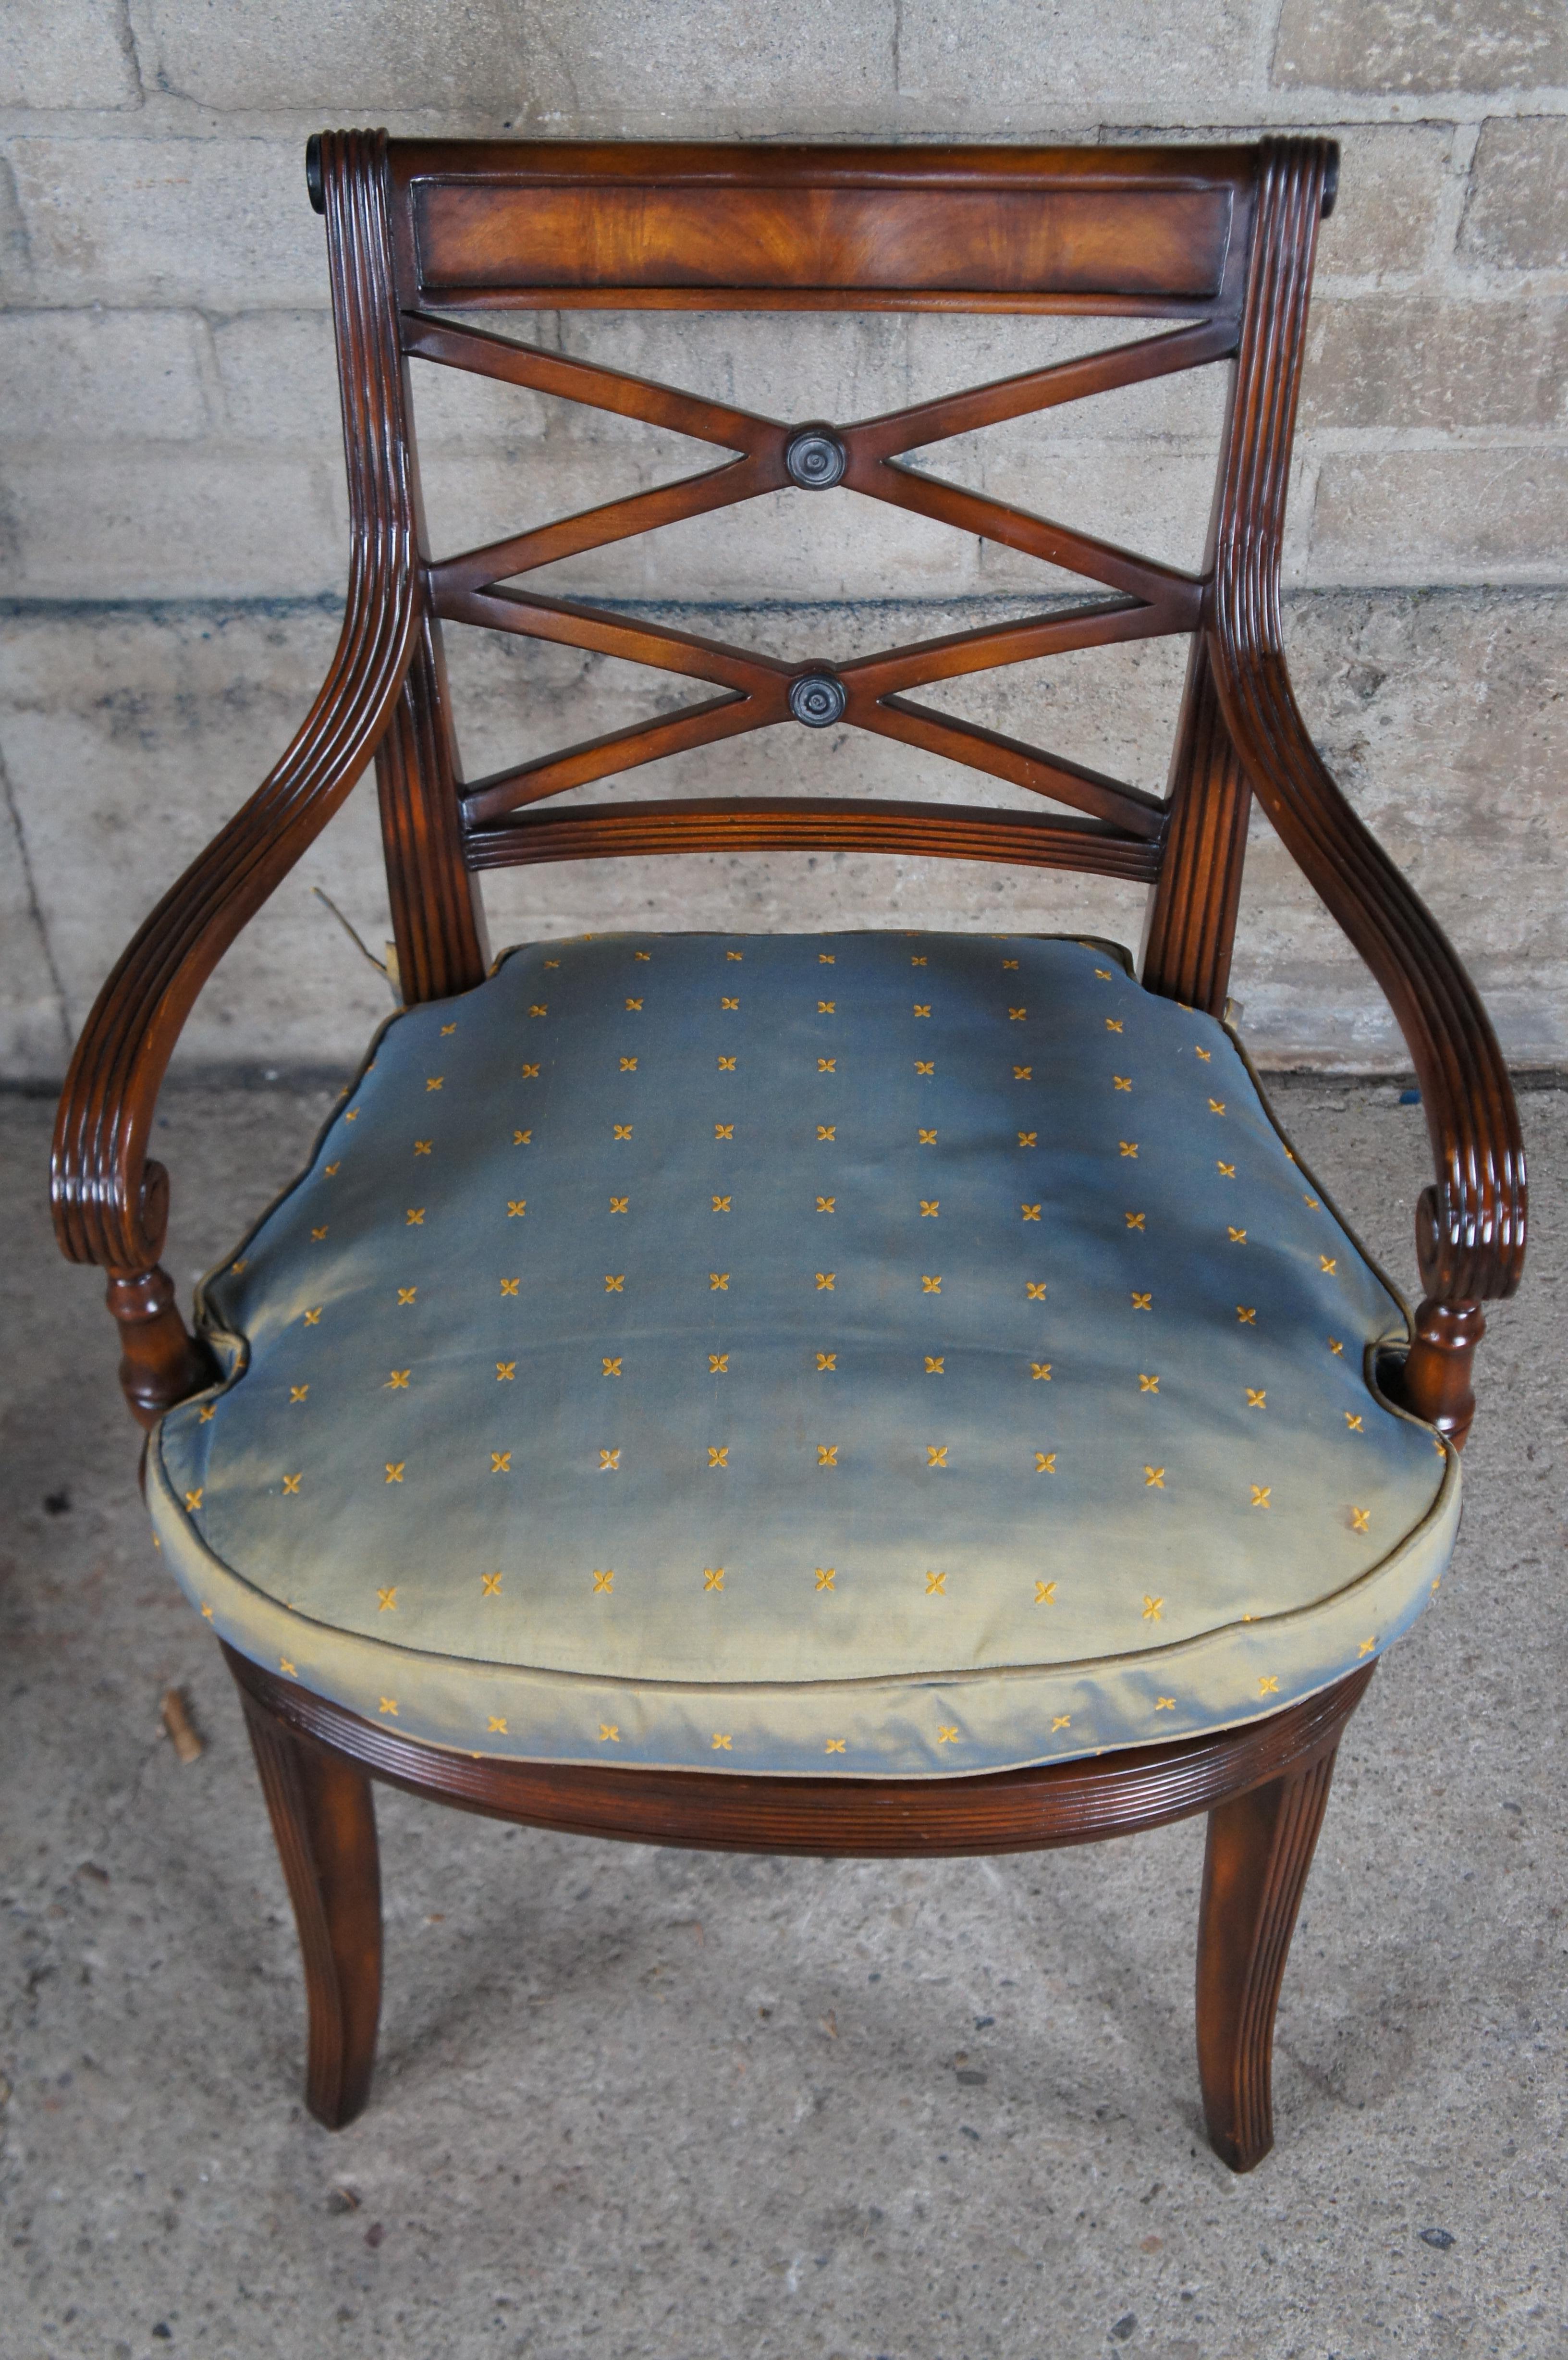 Upholstery 4 Theodore Alexander Flamed Mahogany X Back Caned Regency Dining Chairs 4100 For Sale